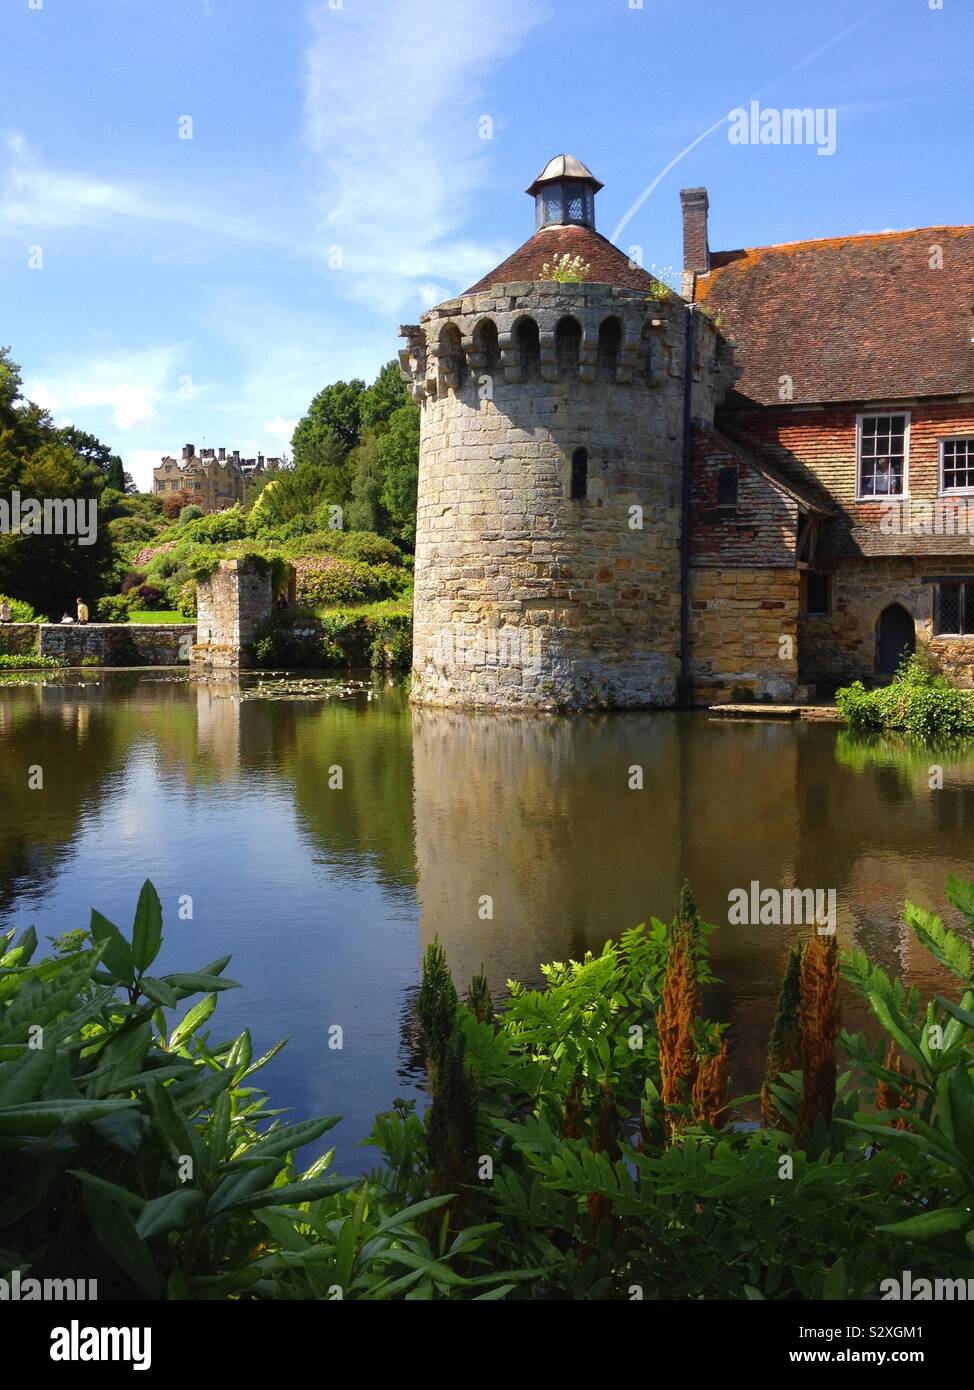 The old castle at Scotney by the lake with the house behind Stock Photo